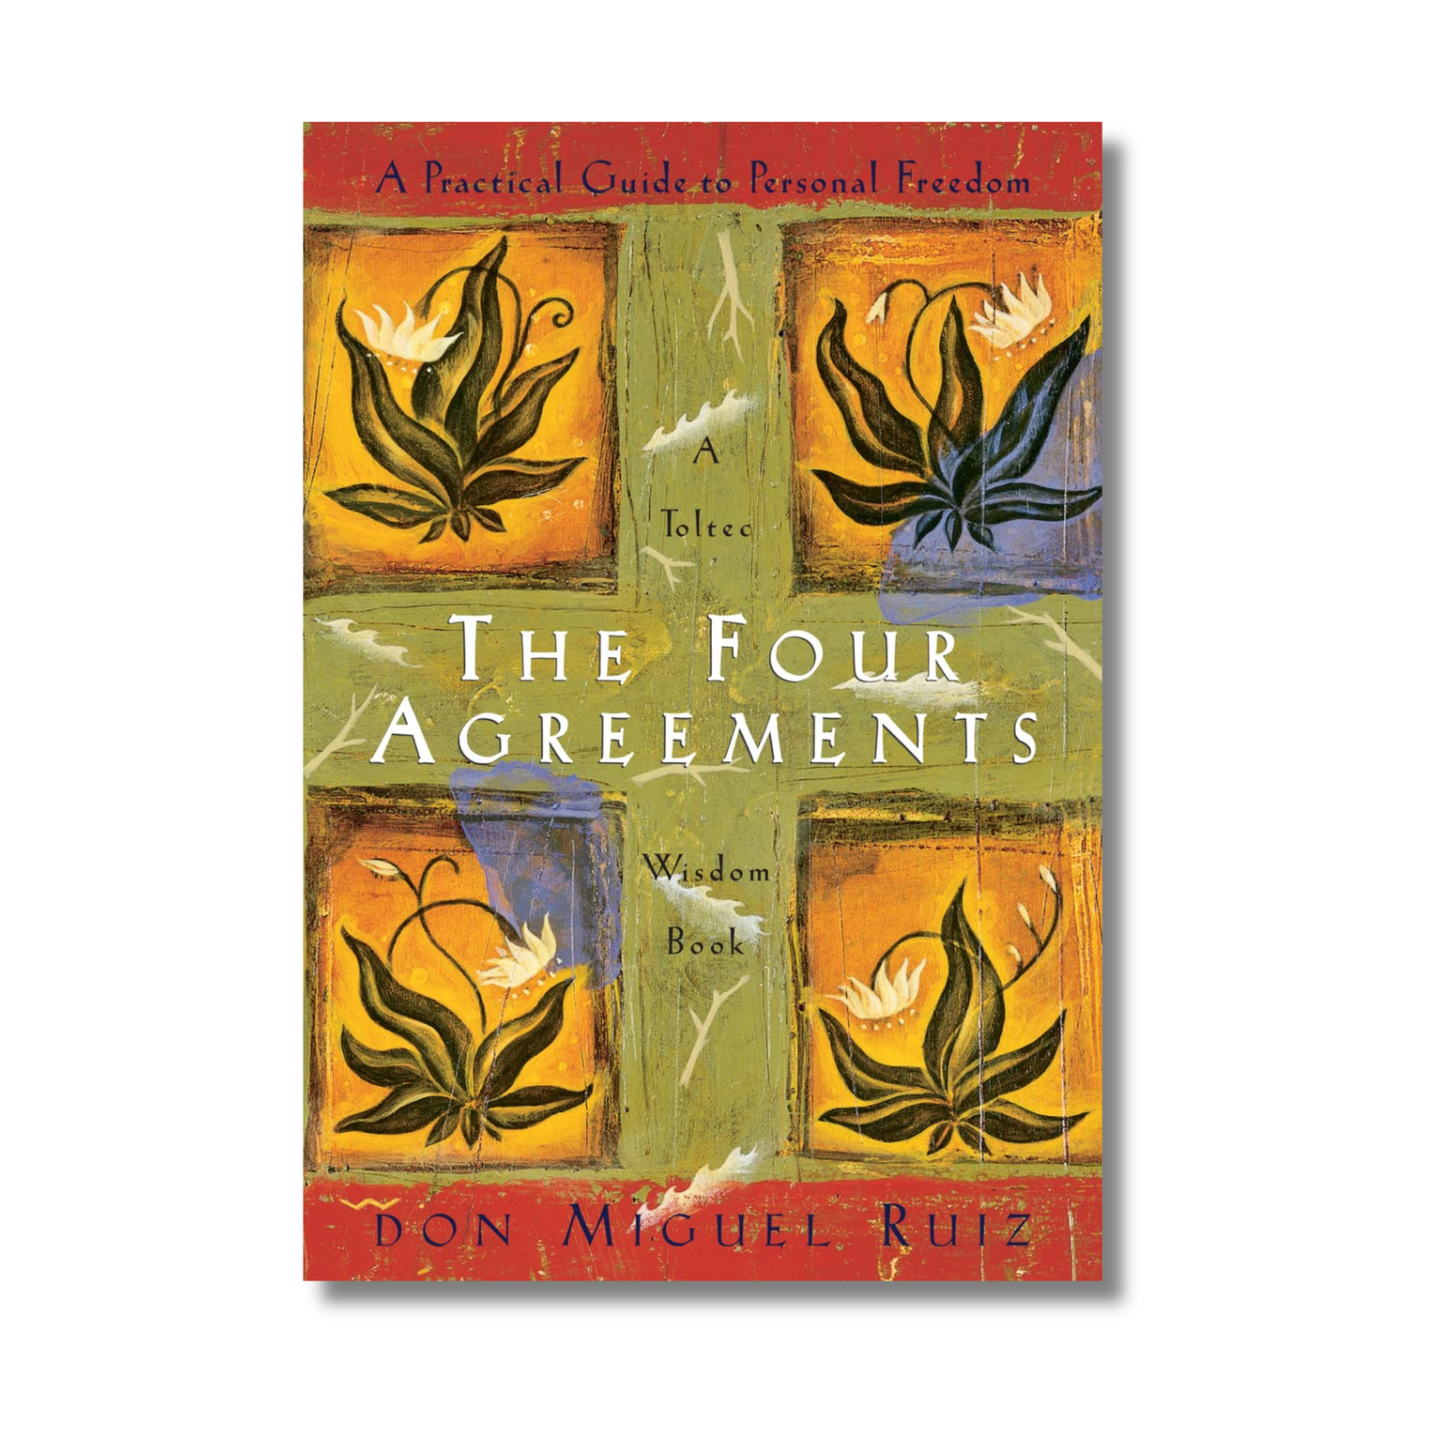 The Four Agreements: A Practical Guide to Personal Freedom by Don Miguel Ruiz (Paperback)